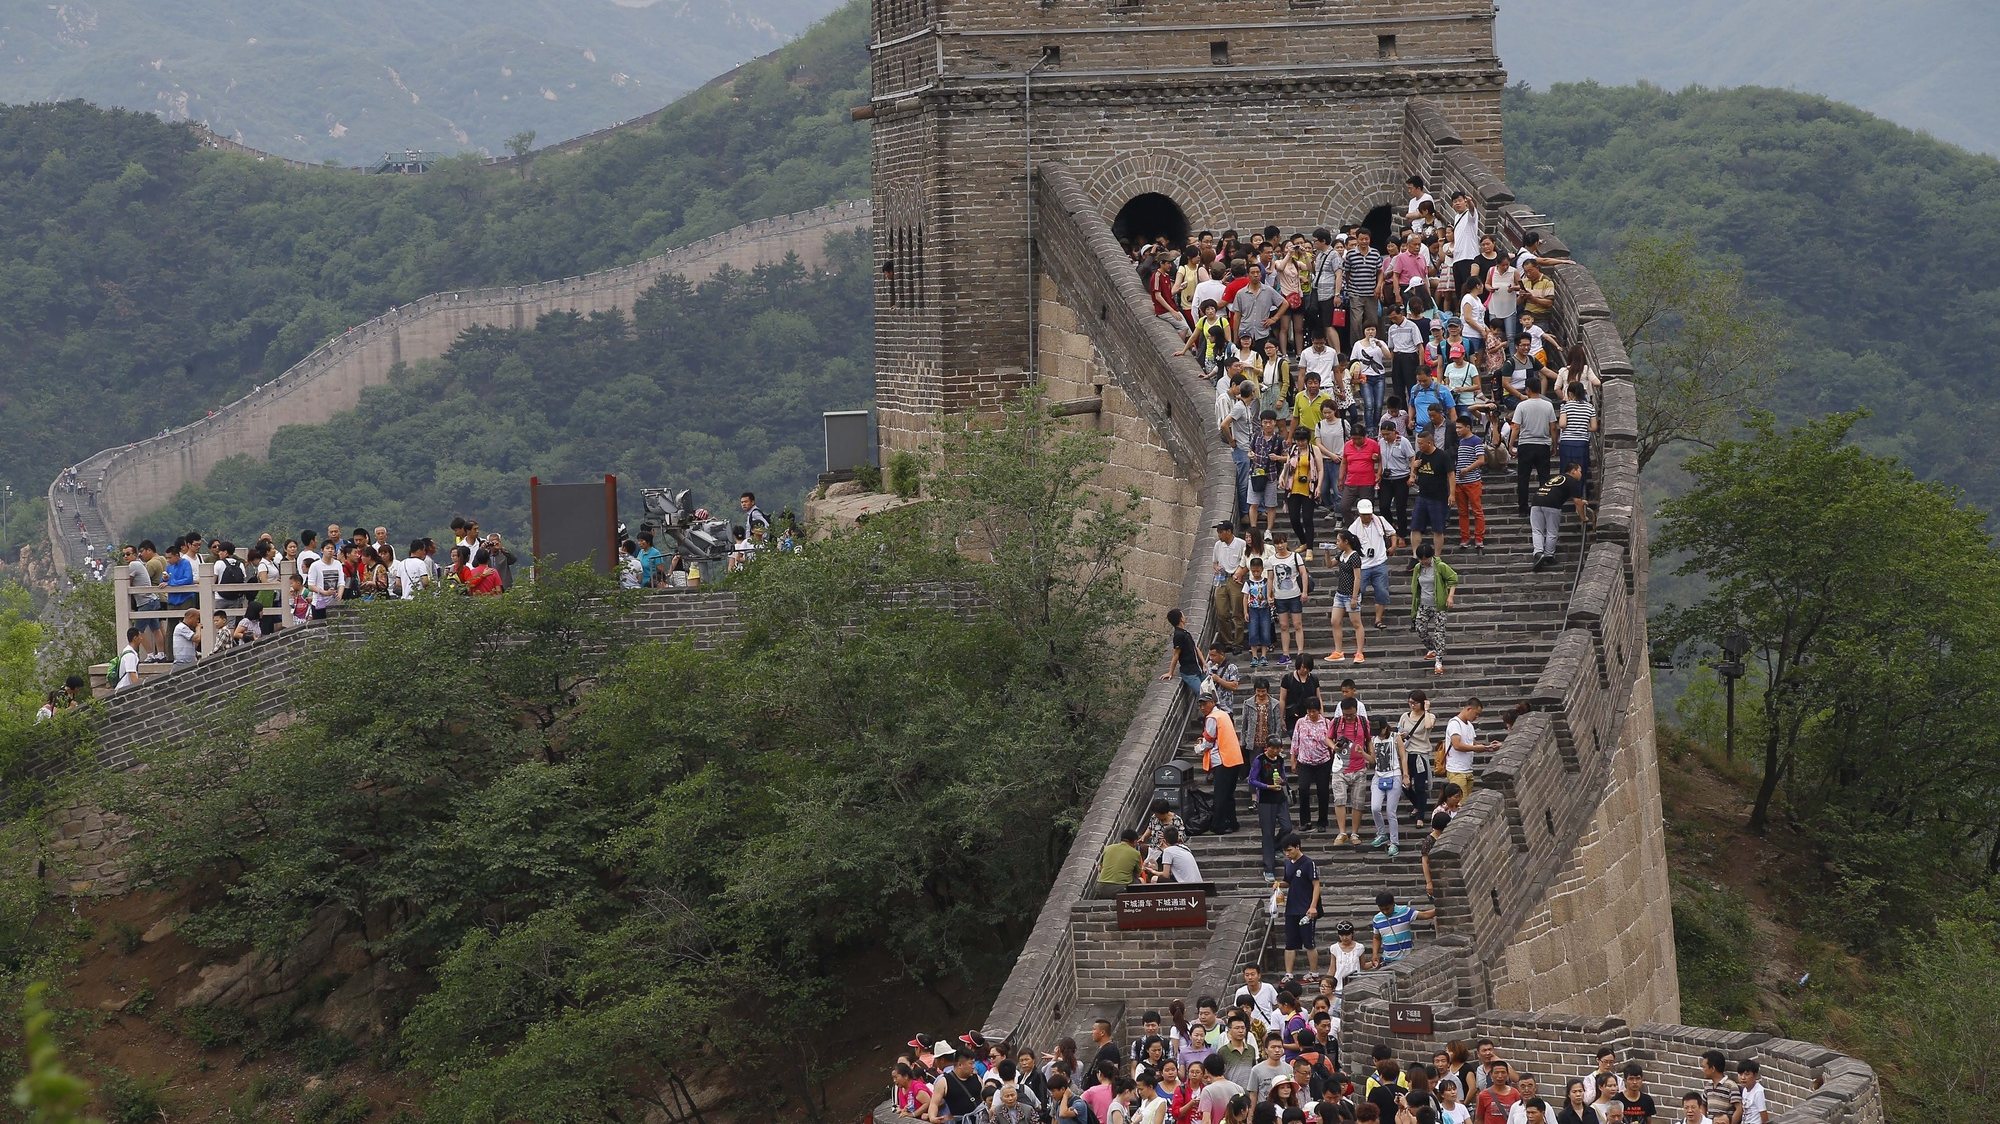 epa04234784 Tourists make their way through the Badaling section of the Great Wall in Beijing, China, 01 June 2014. As the Dragon Boat Festival which is also known as the Duanwu Festival is observed with a three-day holiday from 31 May to 02 June, local and foreign tourists are trooping to popular attractions in Beijing to enjoy and boost tourism. Duanwu Festiv the fifth lunar month in honor of Qu Yuan, an ancient Chinese poet and statesman.  EPA/ROLEX DELA PENA